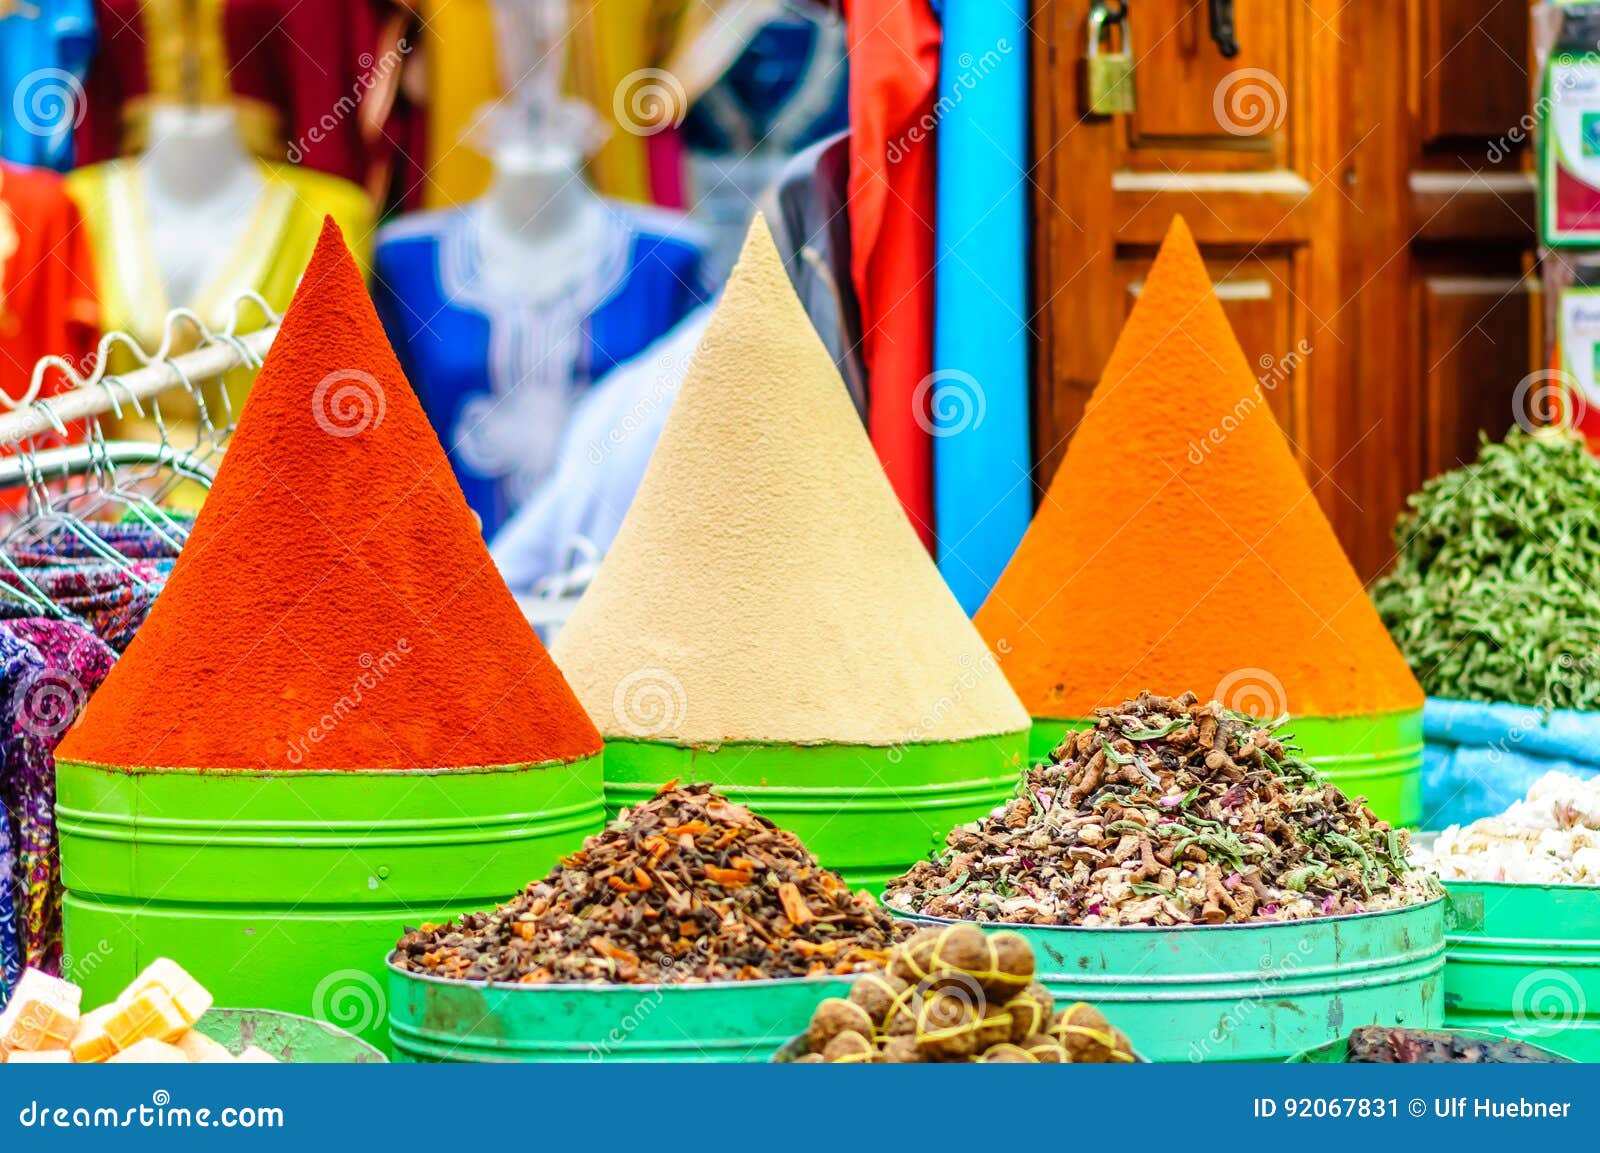 spices on market in marrakech - morocco